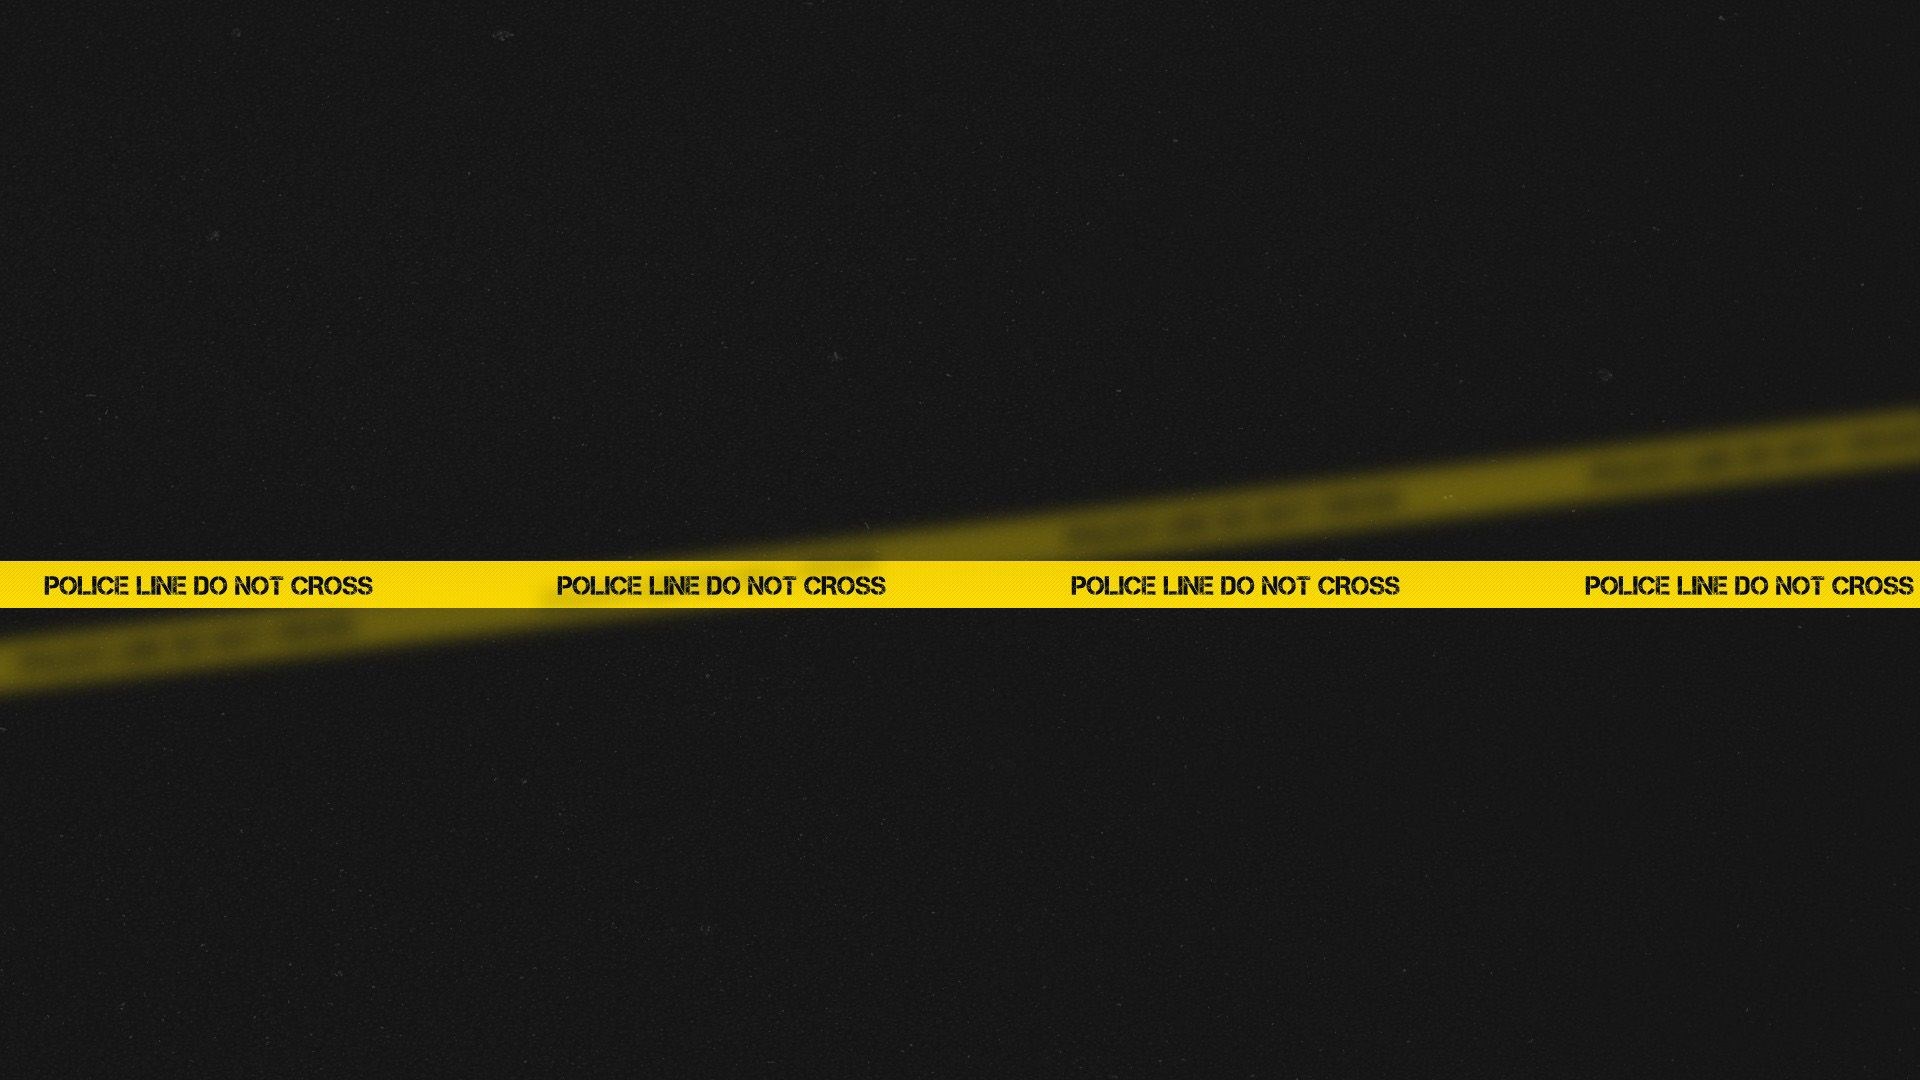 3d Rendering Of Caution Tape With POLICELINE DO NOT CROSS Written On It  Stock Photo, Picture and Royalty Free Image. Image 7250868.